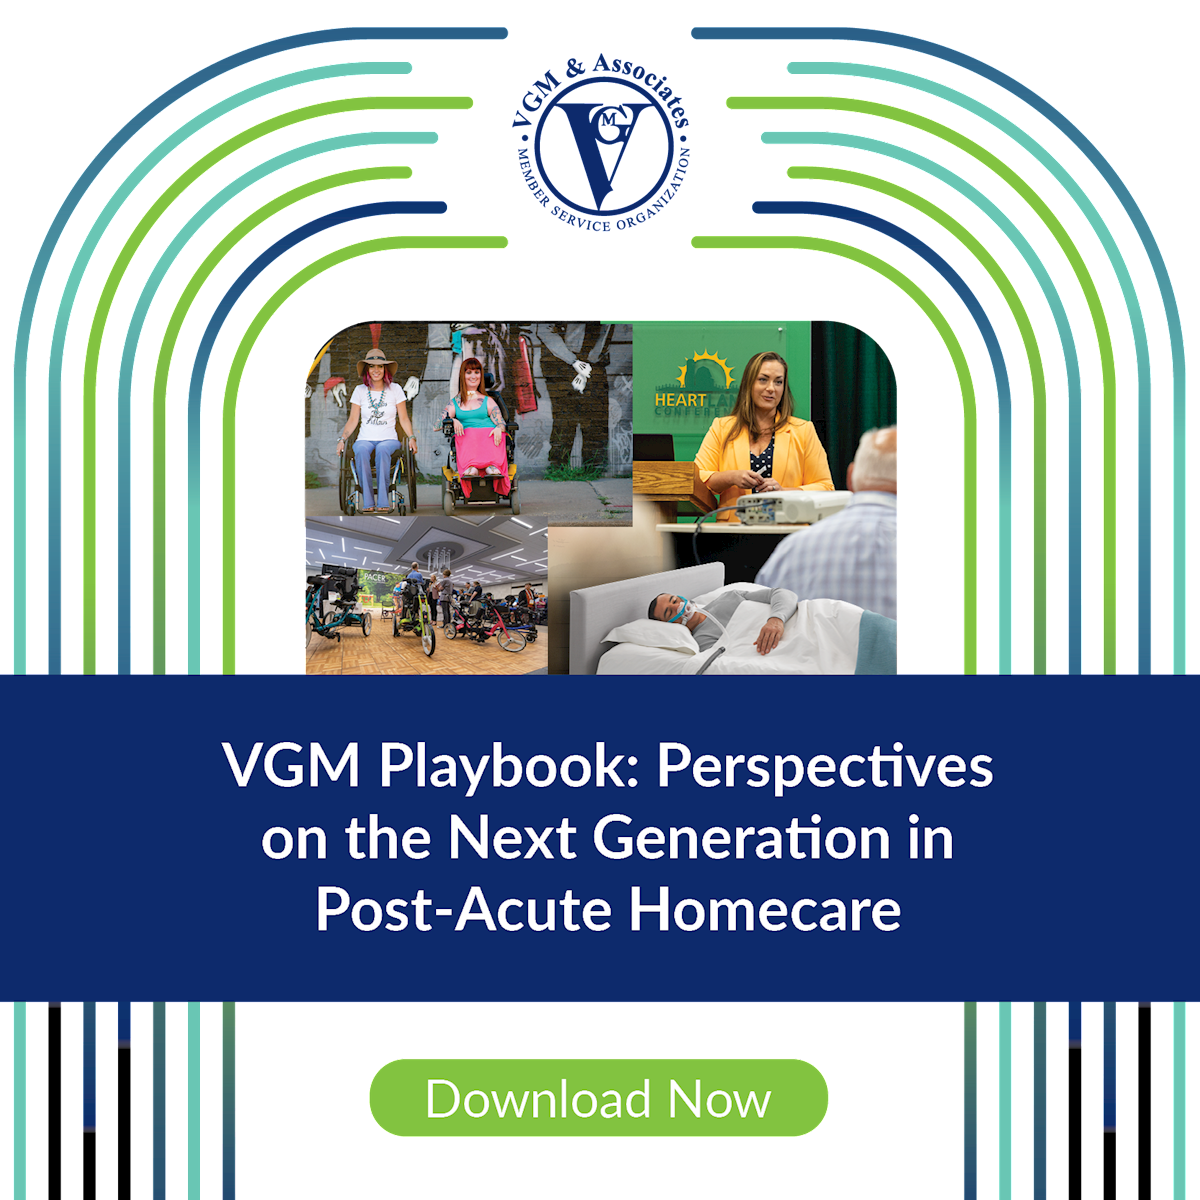 VGM & Associates Releases Latest Playbook on Next Generation in Post-Acute Homecare thumbnail